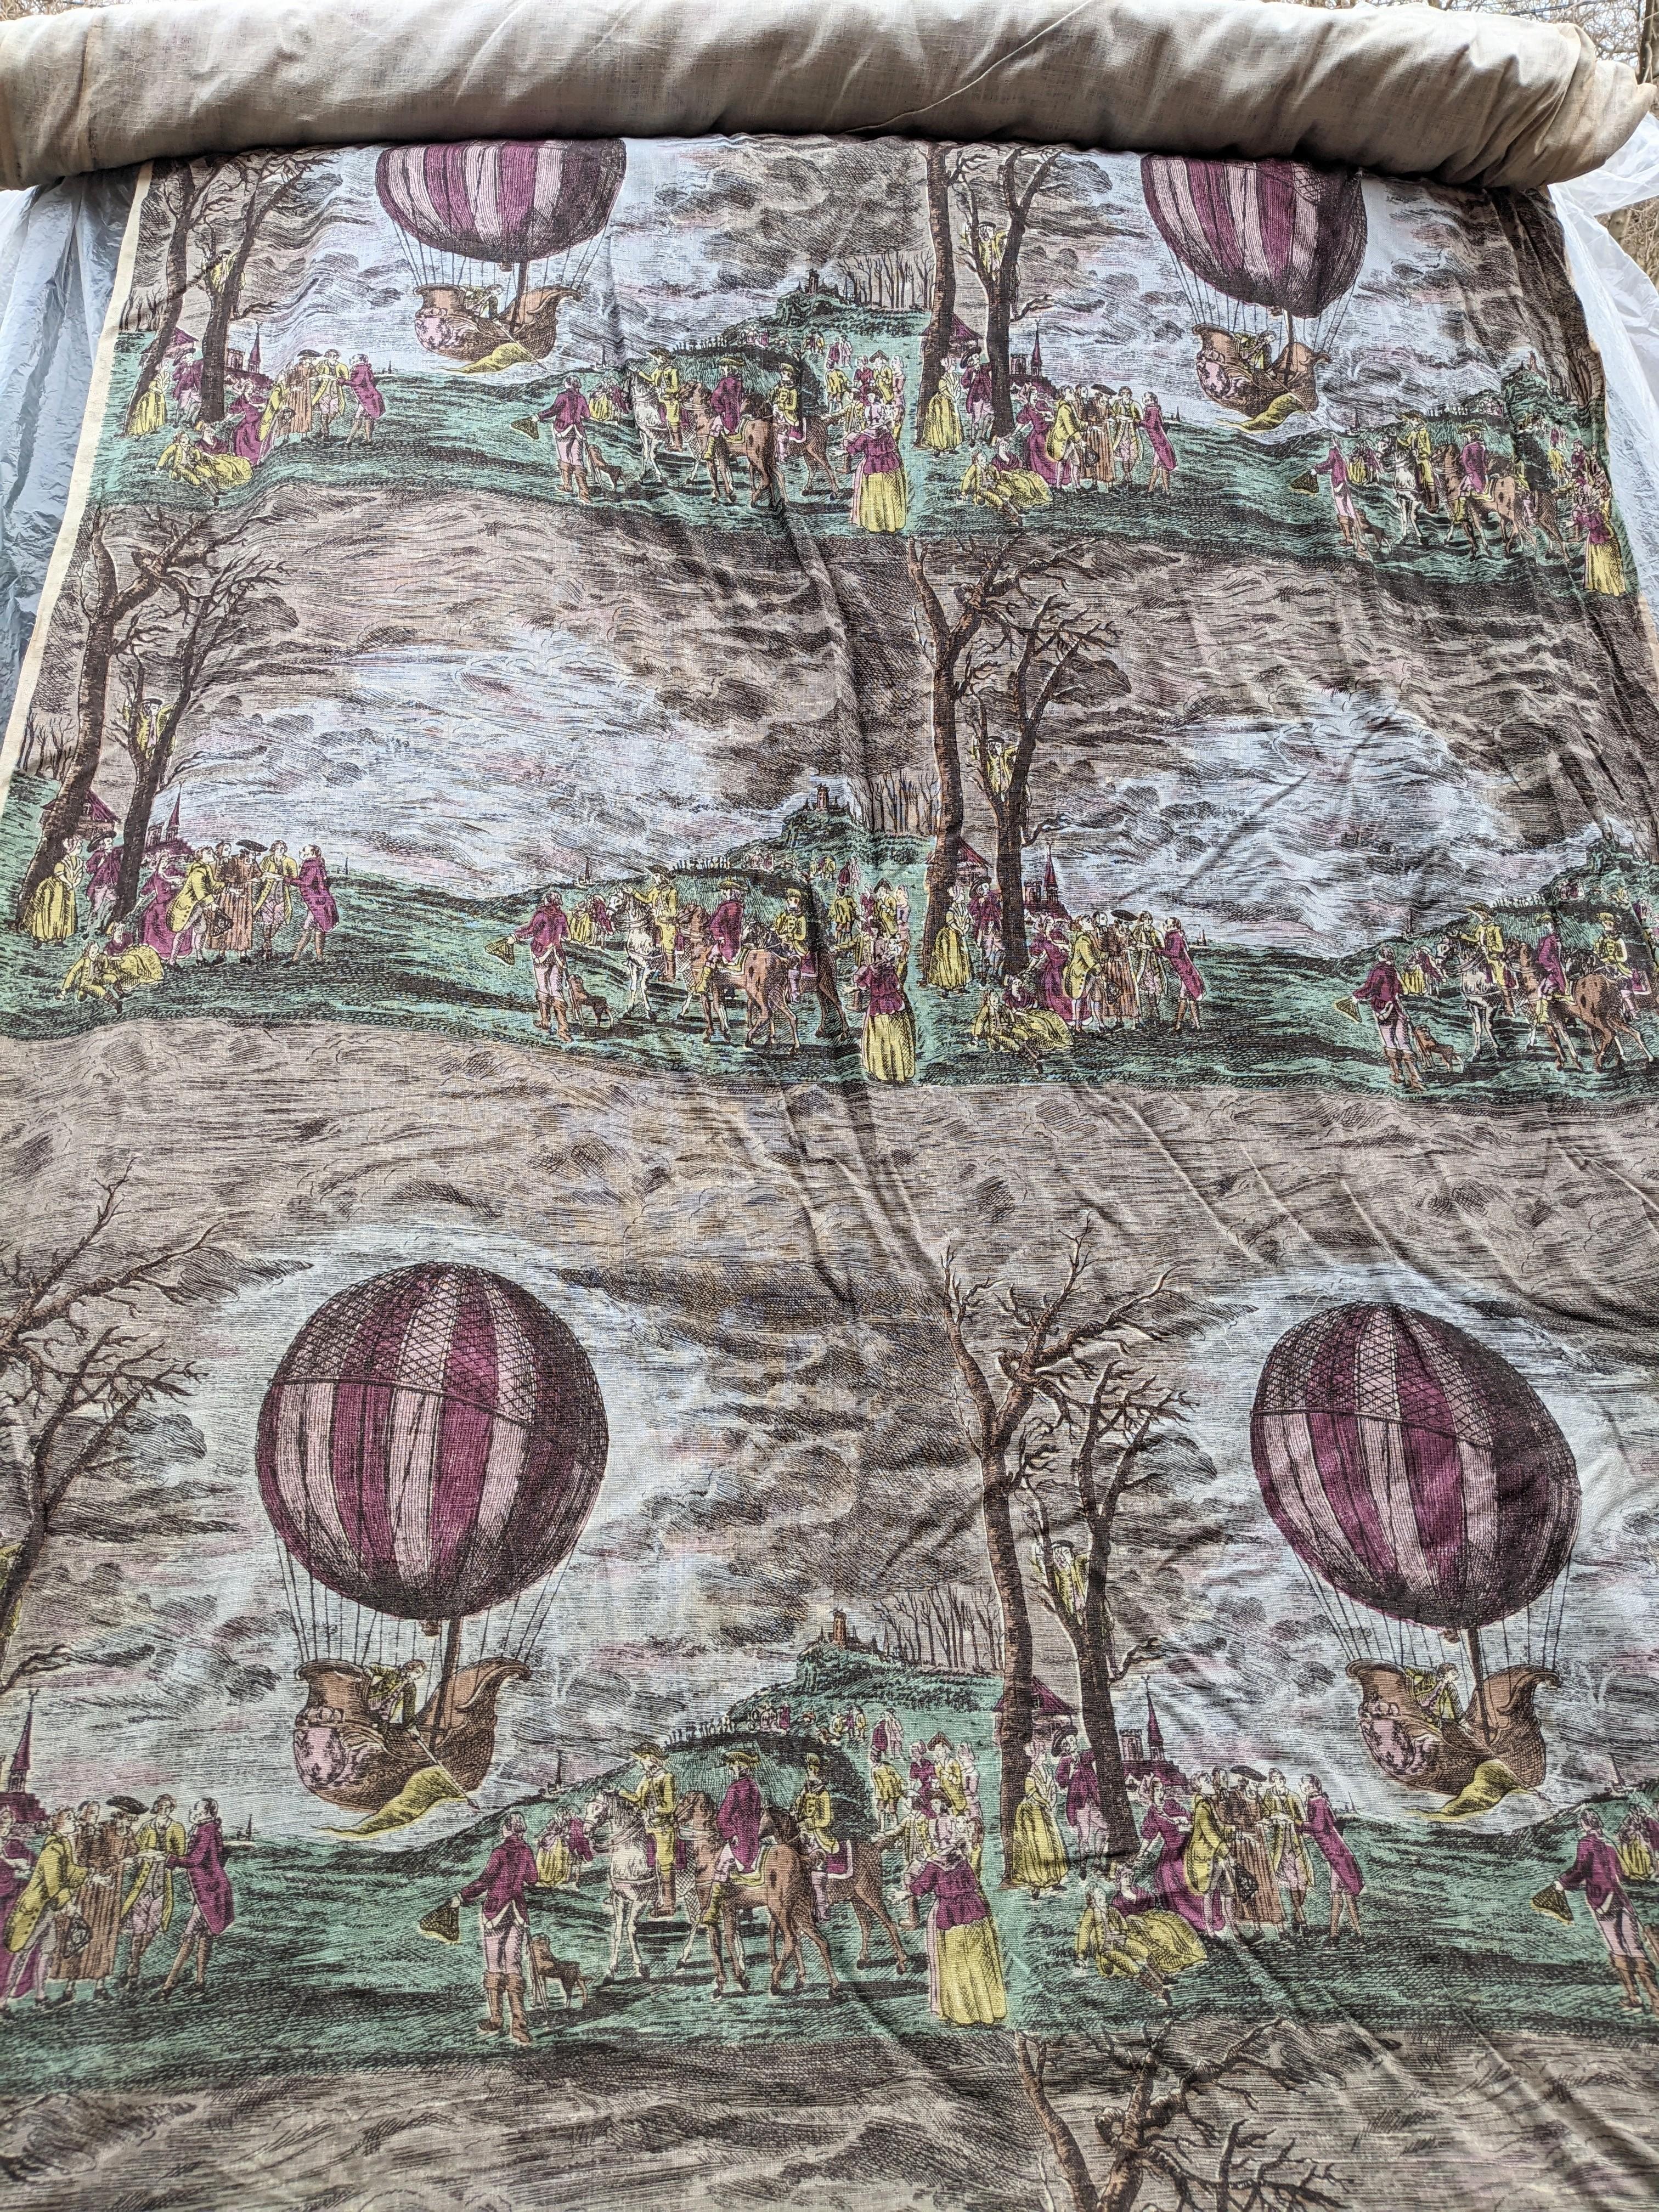 Linen Yardage, 18th Century Hot Air Balloon Scene In Good Condition For Sale In Riverdale, NY